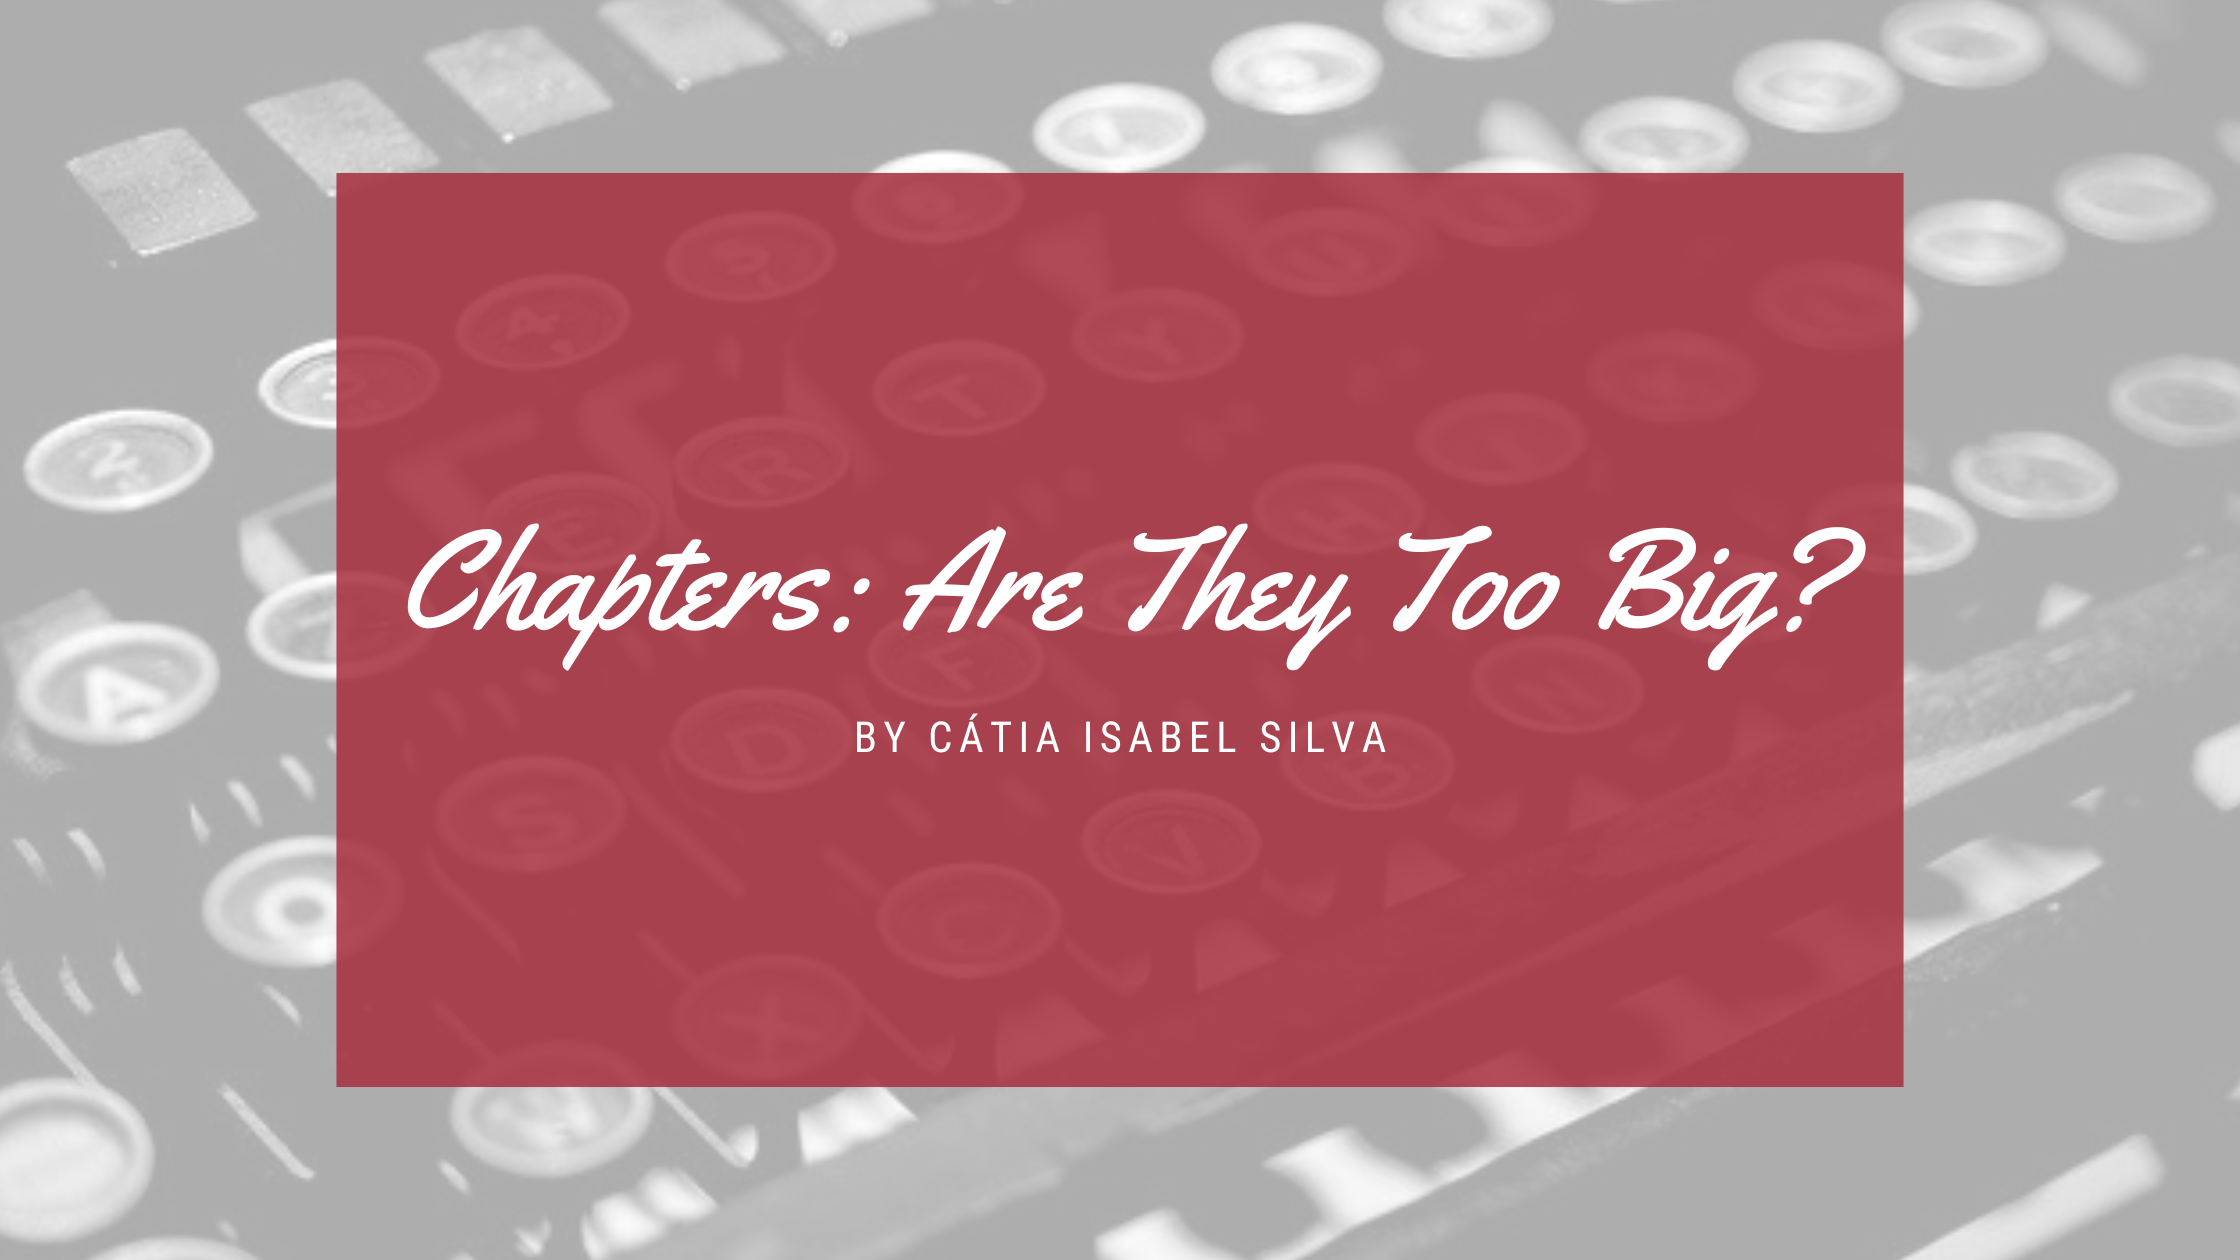 Chapters: Are They Too Big?